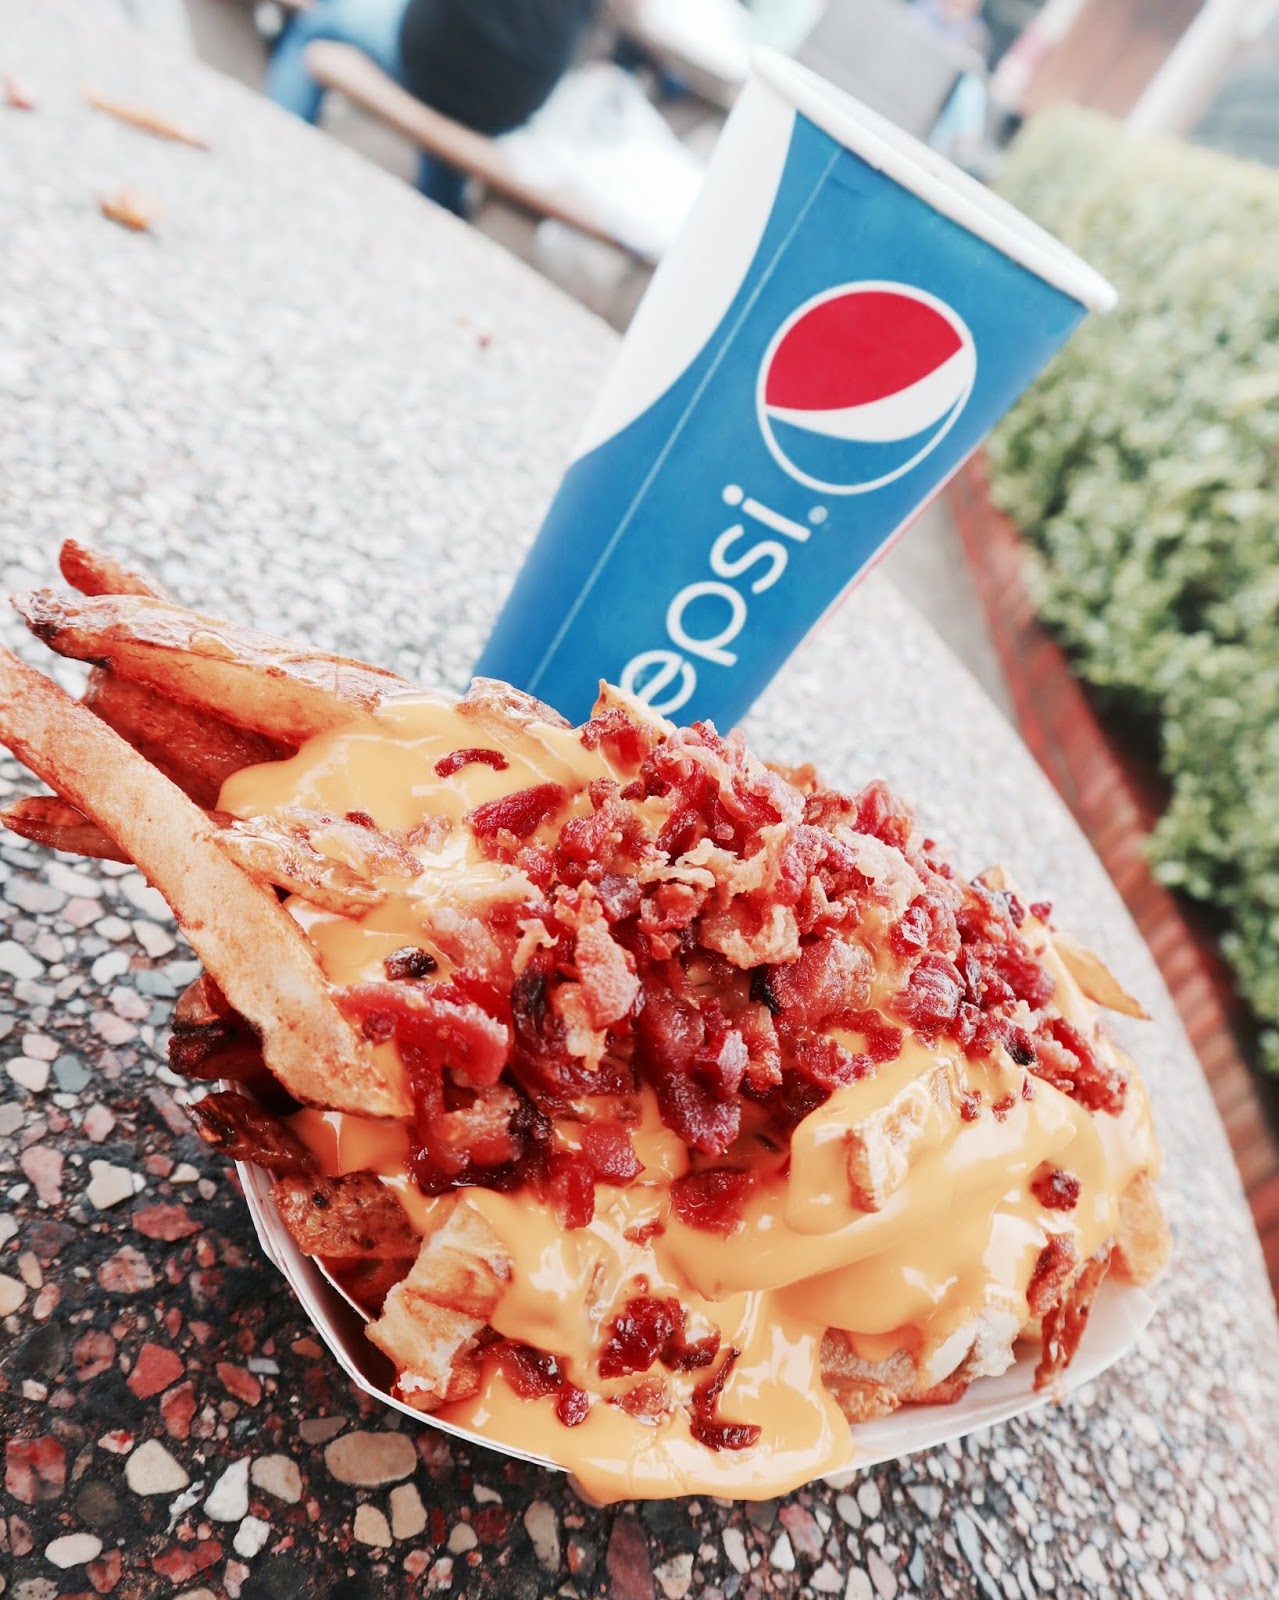 Image of Kennywood Potato Patch Fries